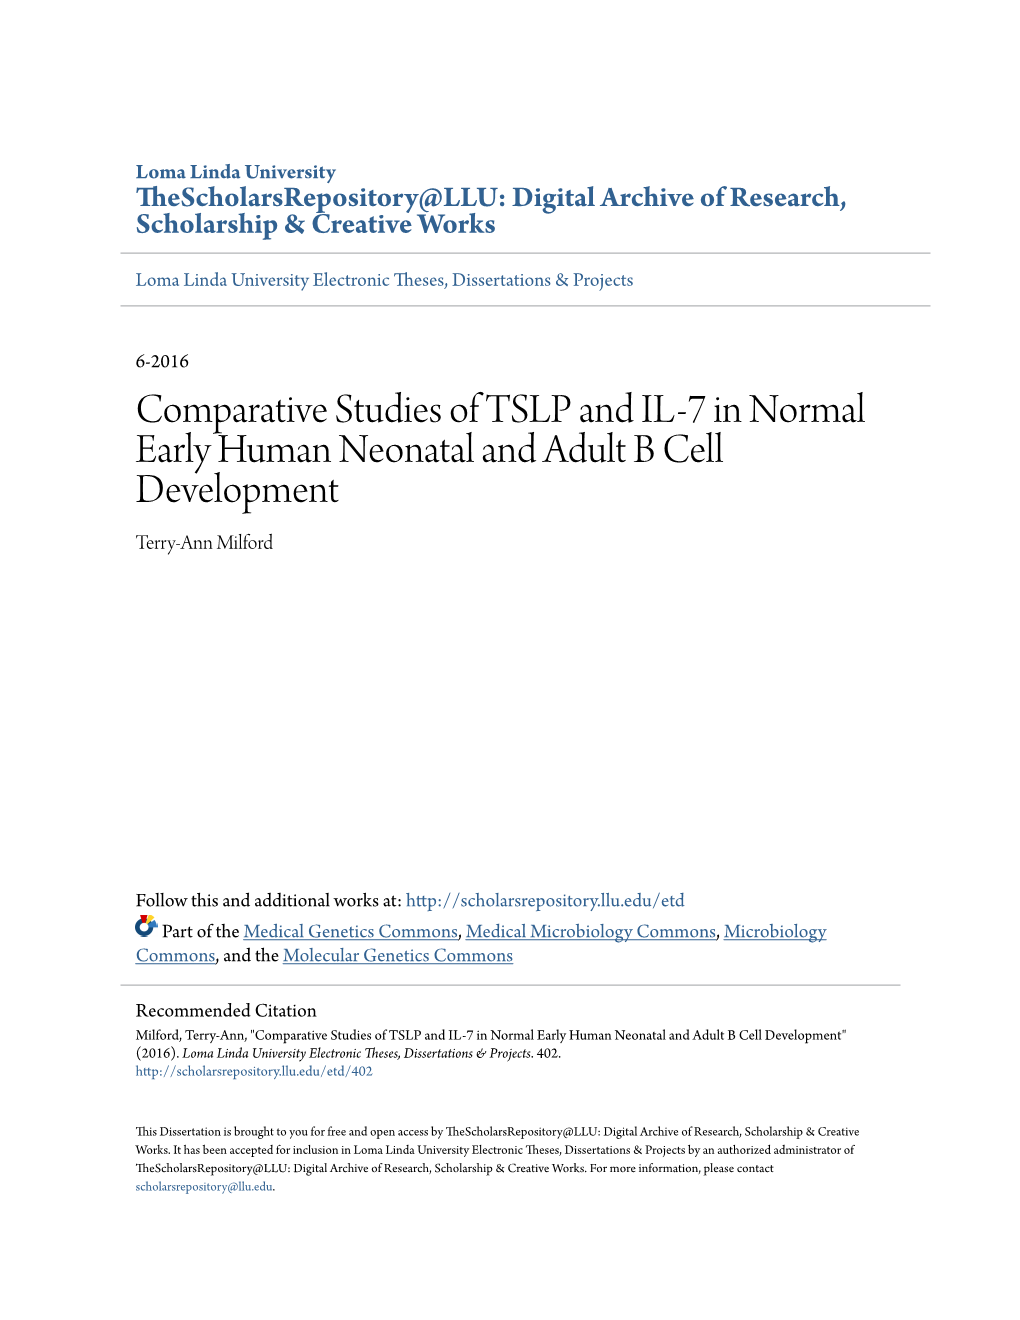 Comparative Studies of TSLP and IL-7 in Normal Early Human Neonatal and Adult B Cell Development Terry-Ann Milford